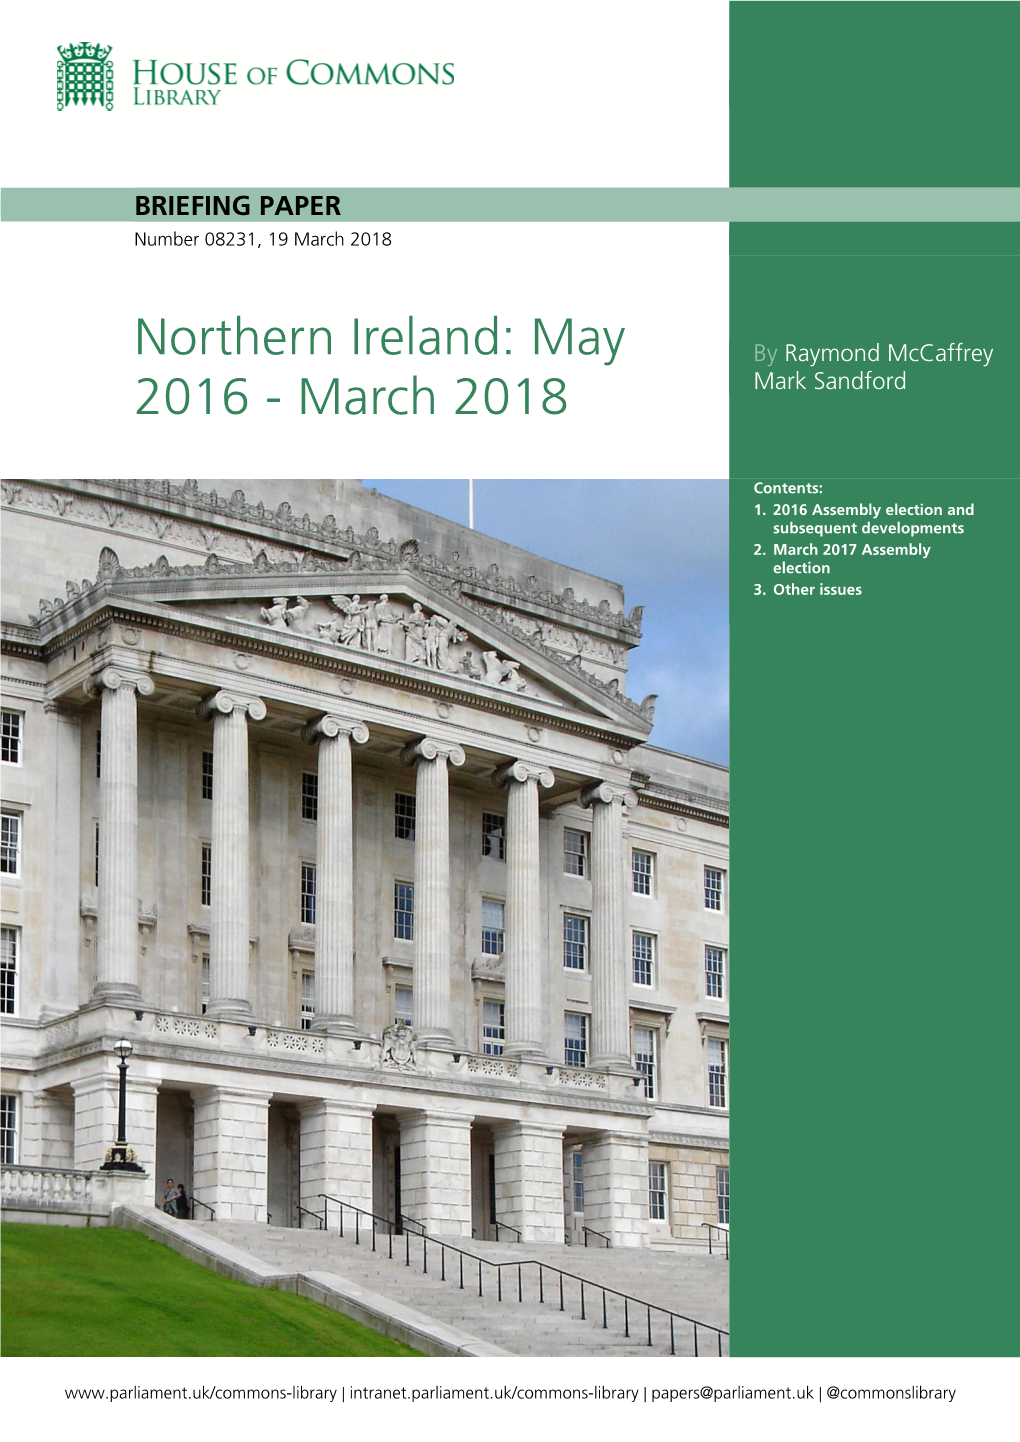 Northern Ireland: May 2016 - March 2018